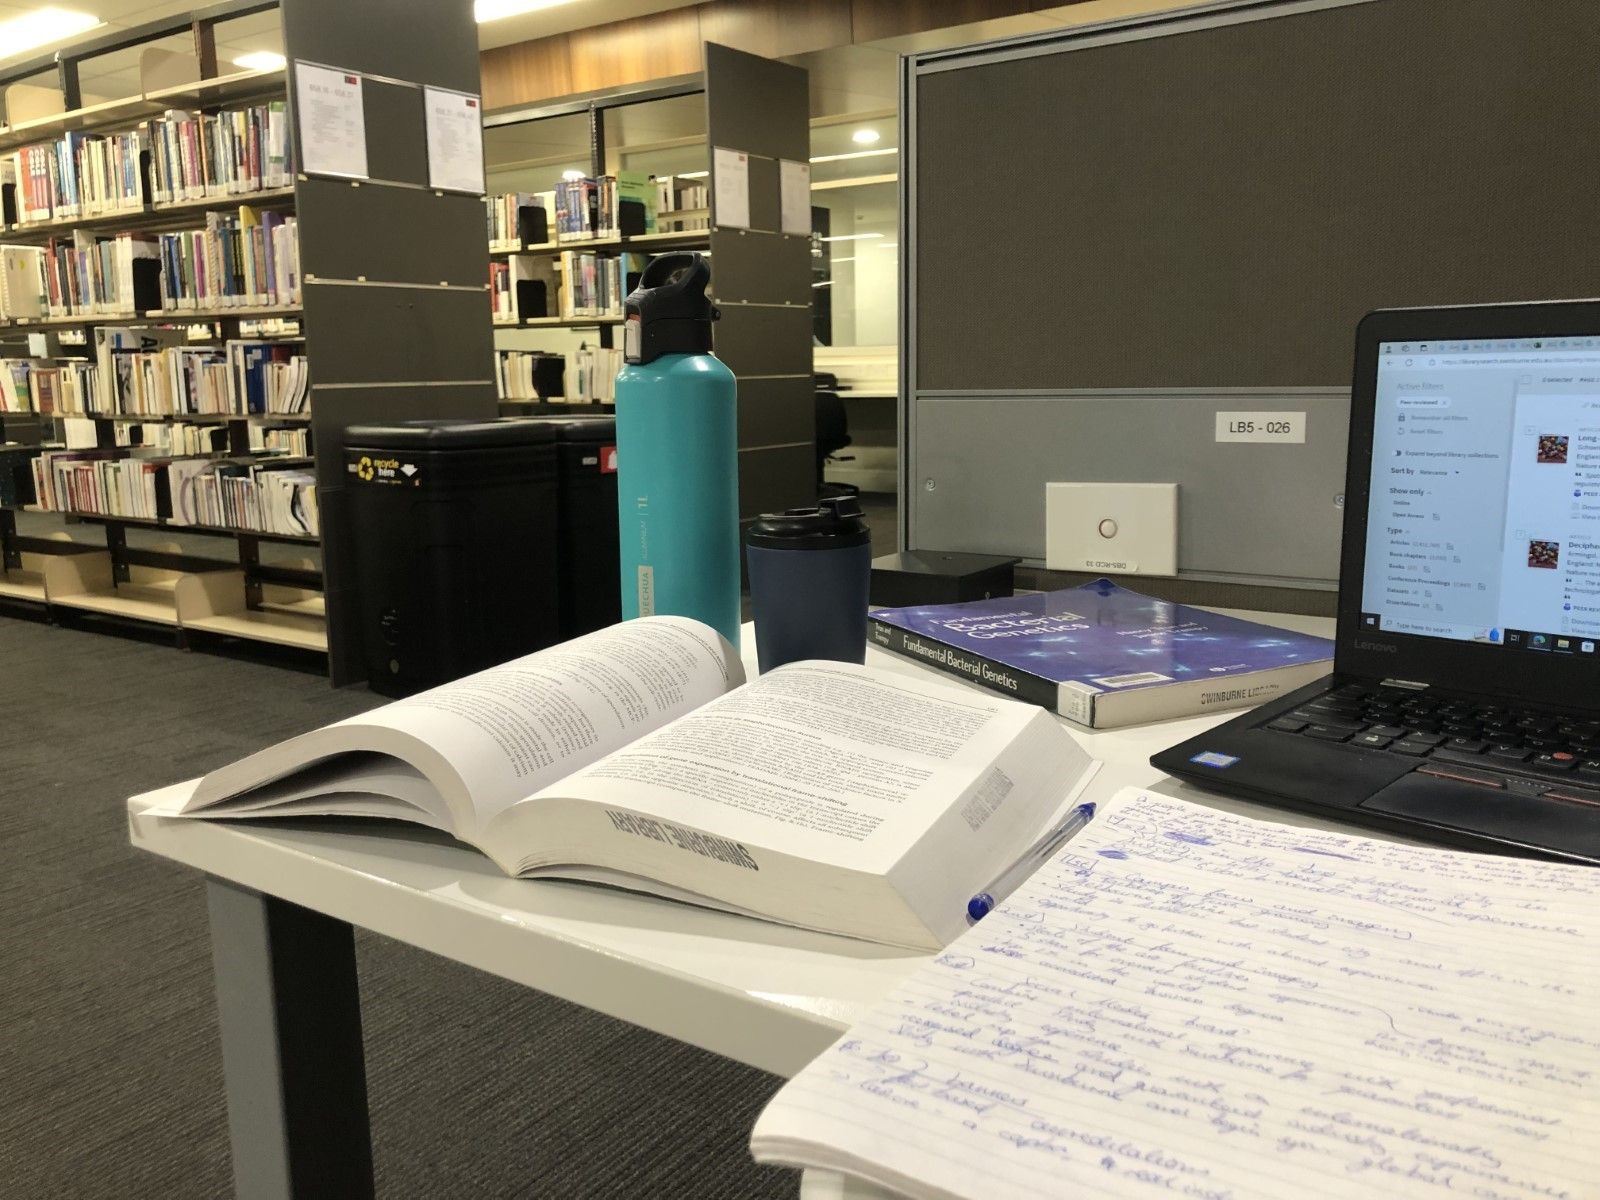 A desk in the Swinburne library with a laptop, open textbooks and a water bottle.